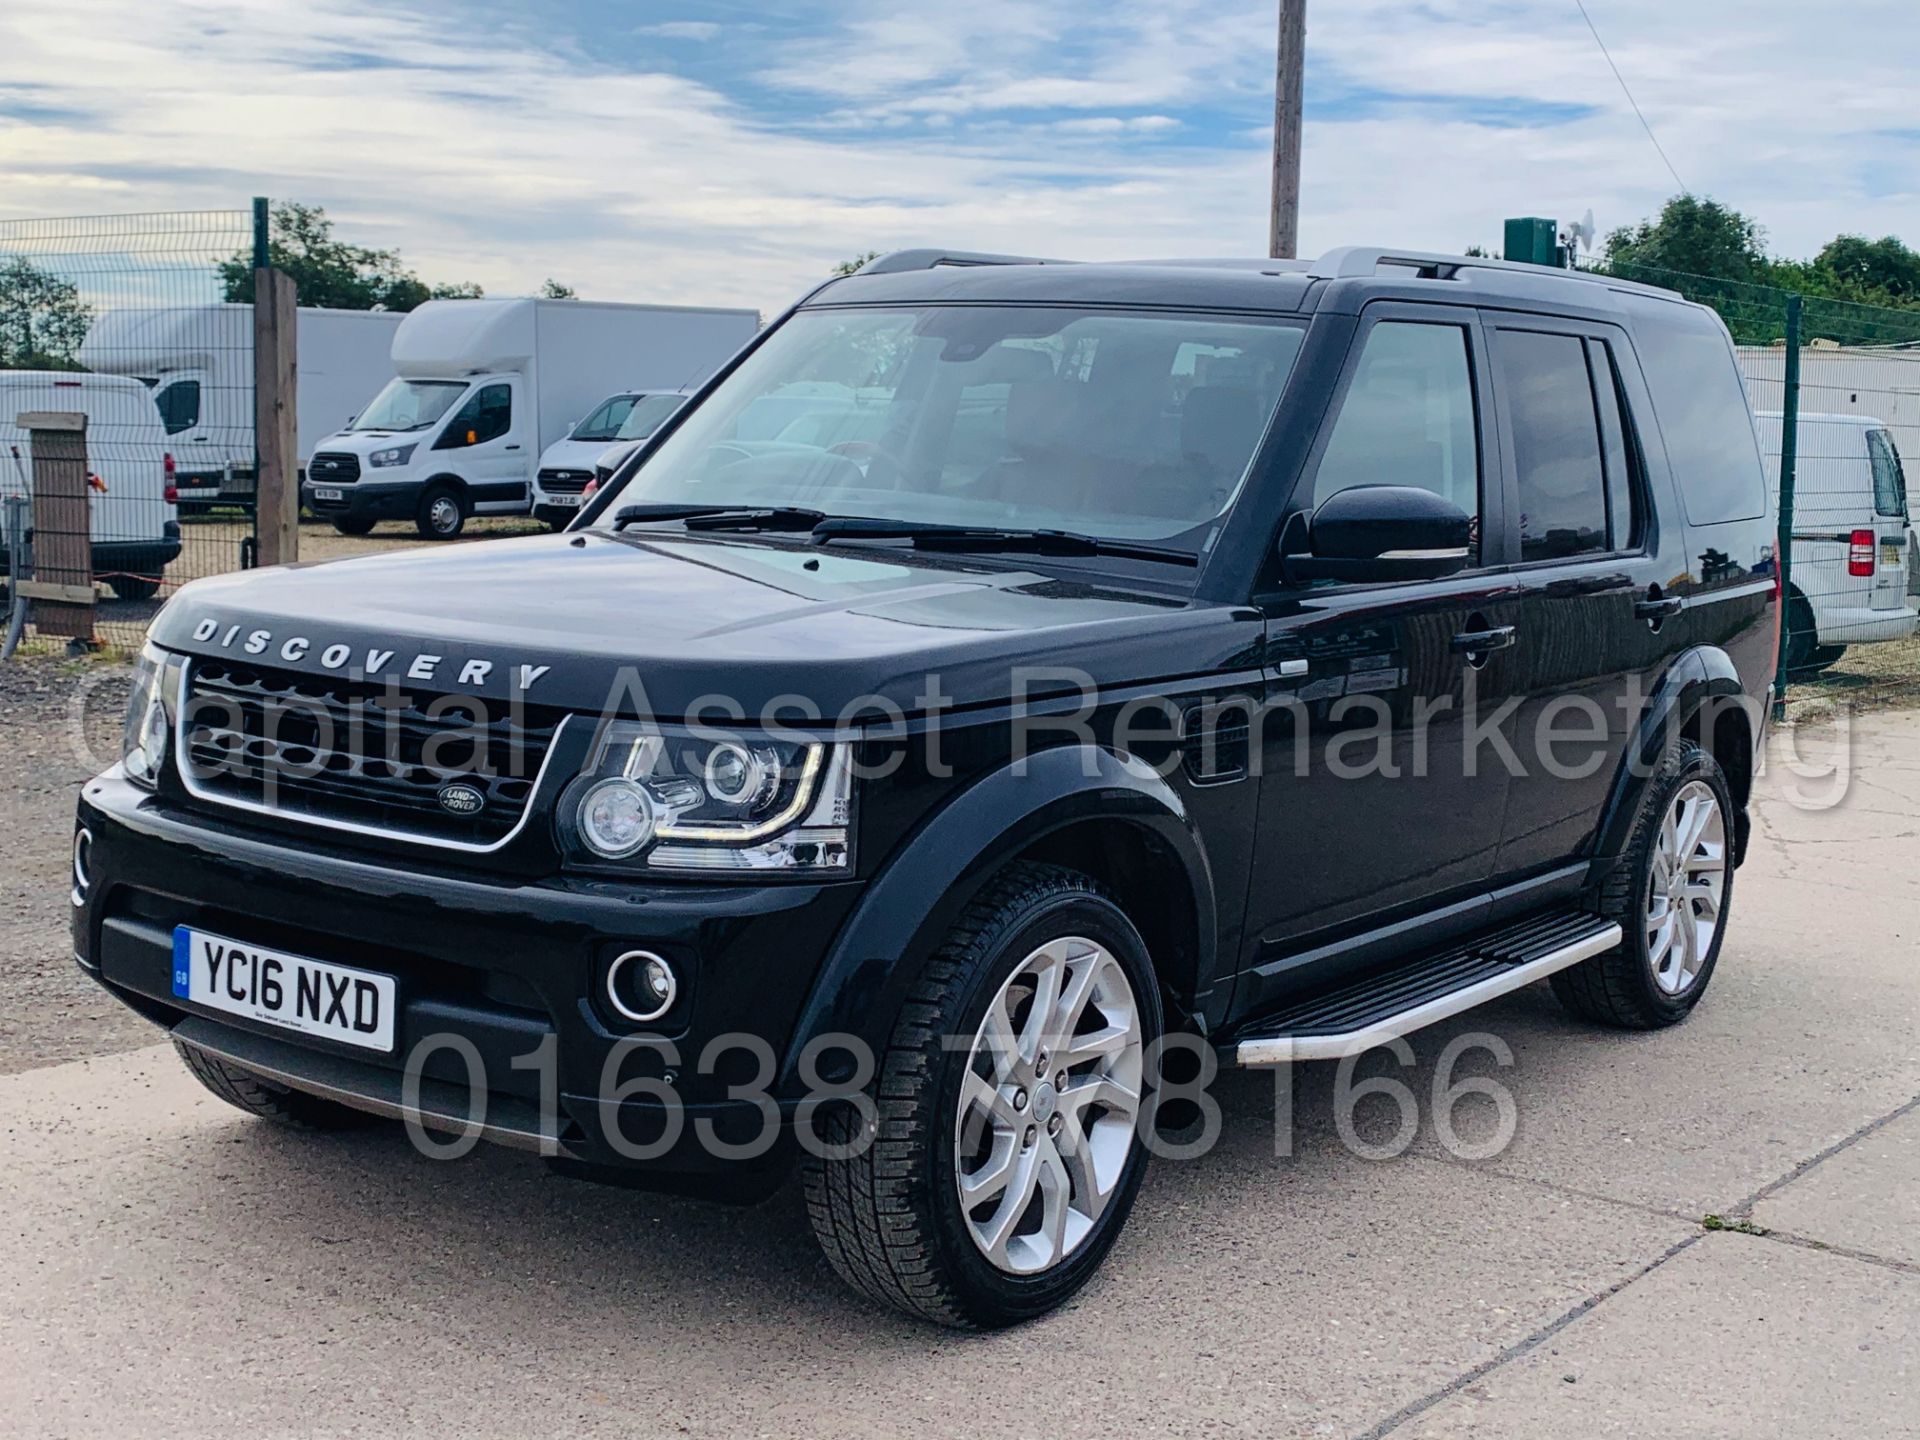 (On Sale) LAND ROVER DISCOVERY 4 *LANDMARK* 7 SEATER SUV (2016) '3.0 SDV6 - 8 SPEED AUTO' (1 OWNER) - Image 5 of 65